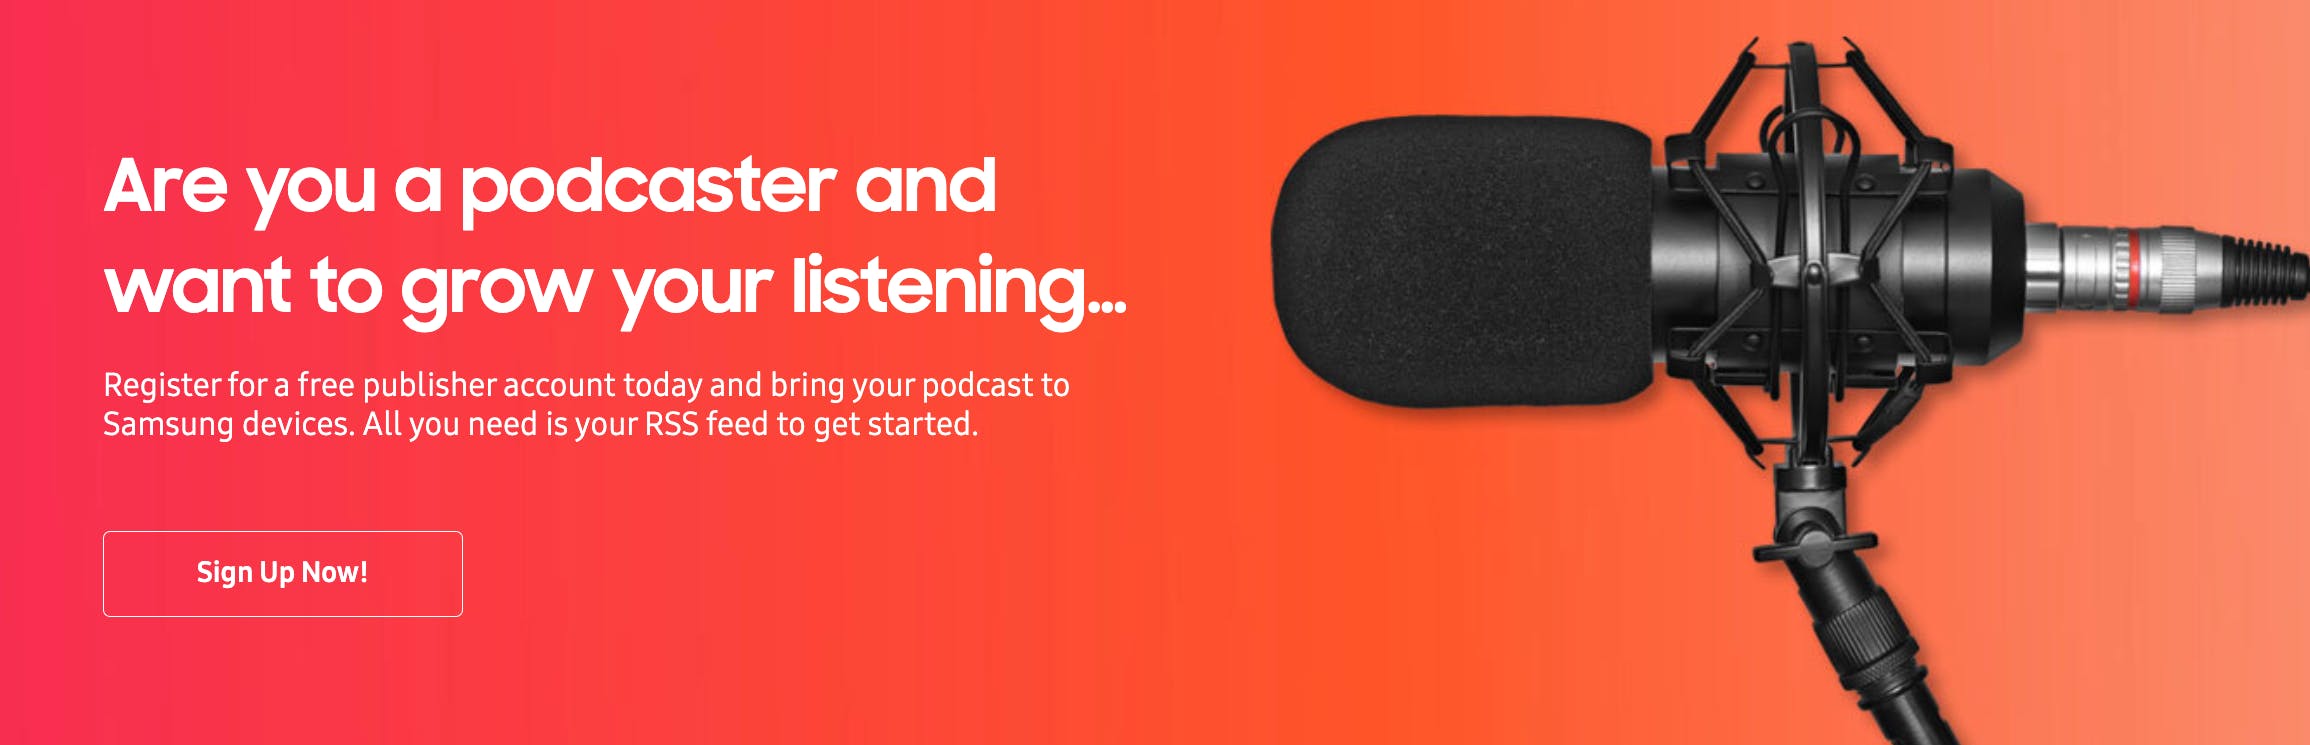 Pink and orange gradient background with a podcast mic on the right and white text on the left